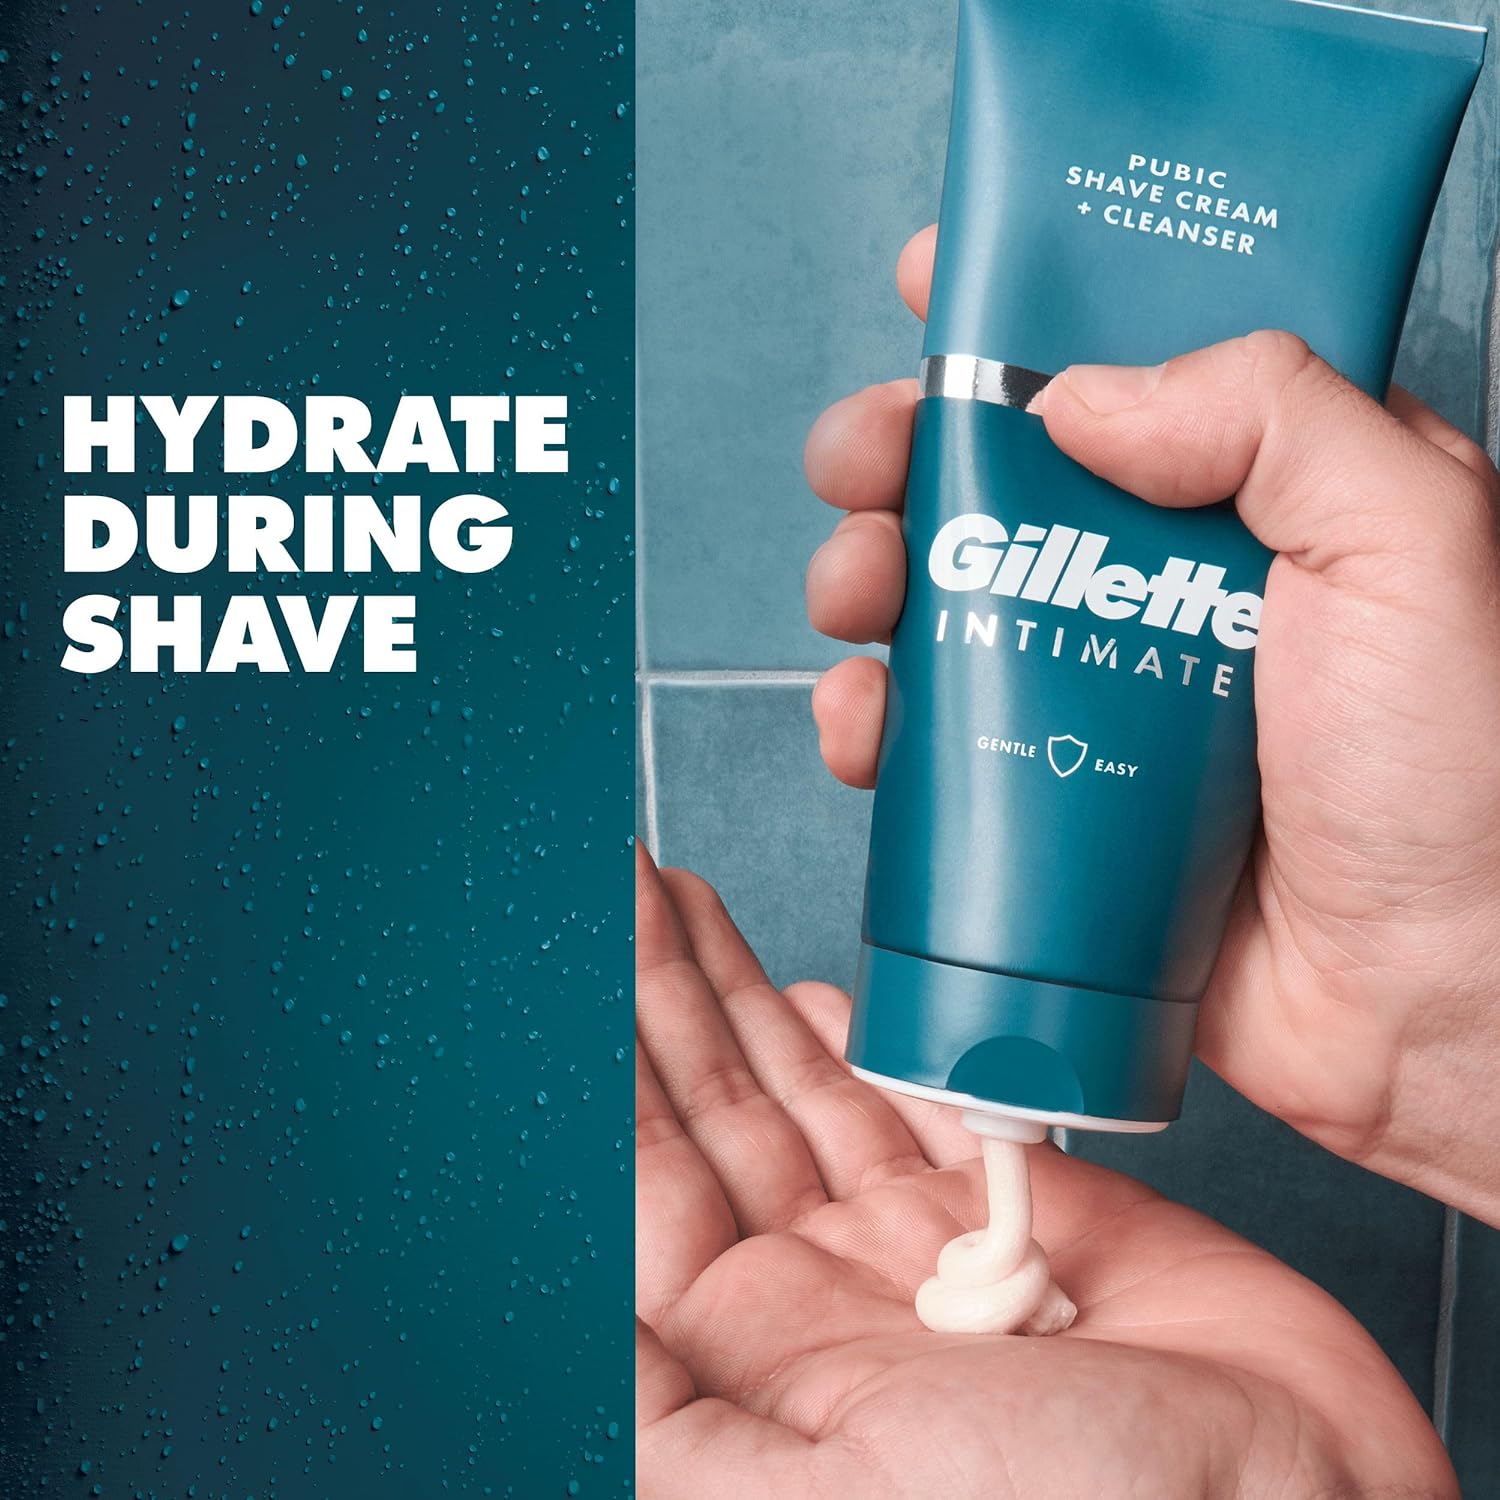 Gillette Intimate 2in1 Shave Cream & Cleanser, Gentle Formula with Aloe, Formulated for Pubic Hair, Paraben Free 150 ml